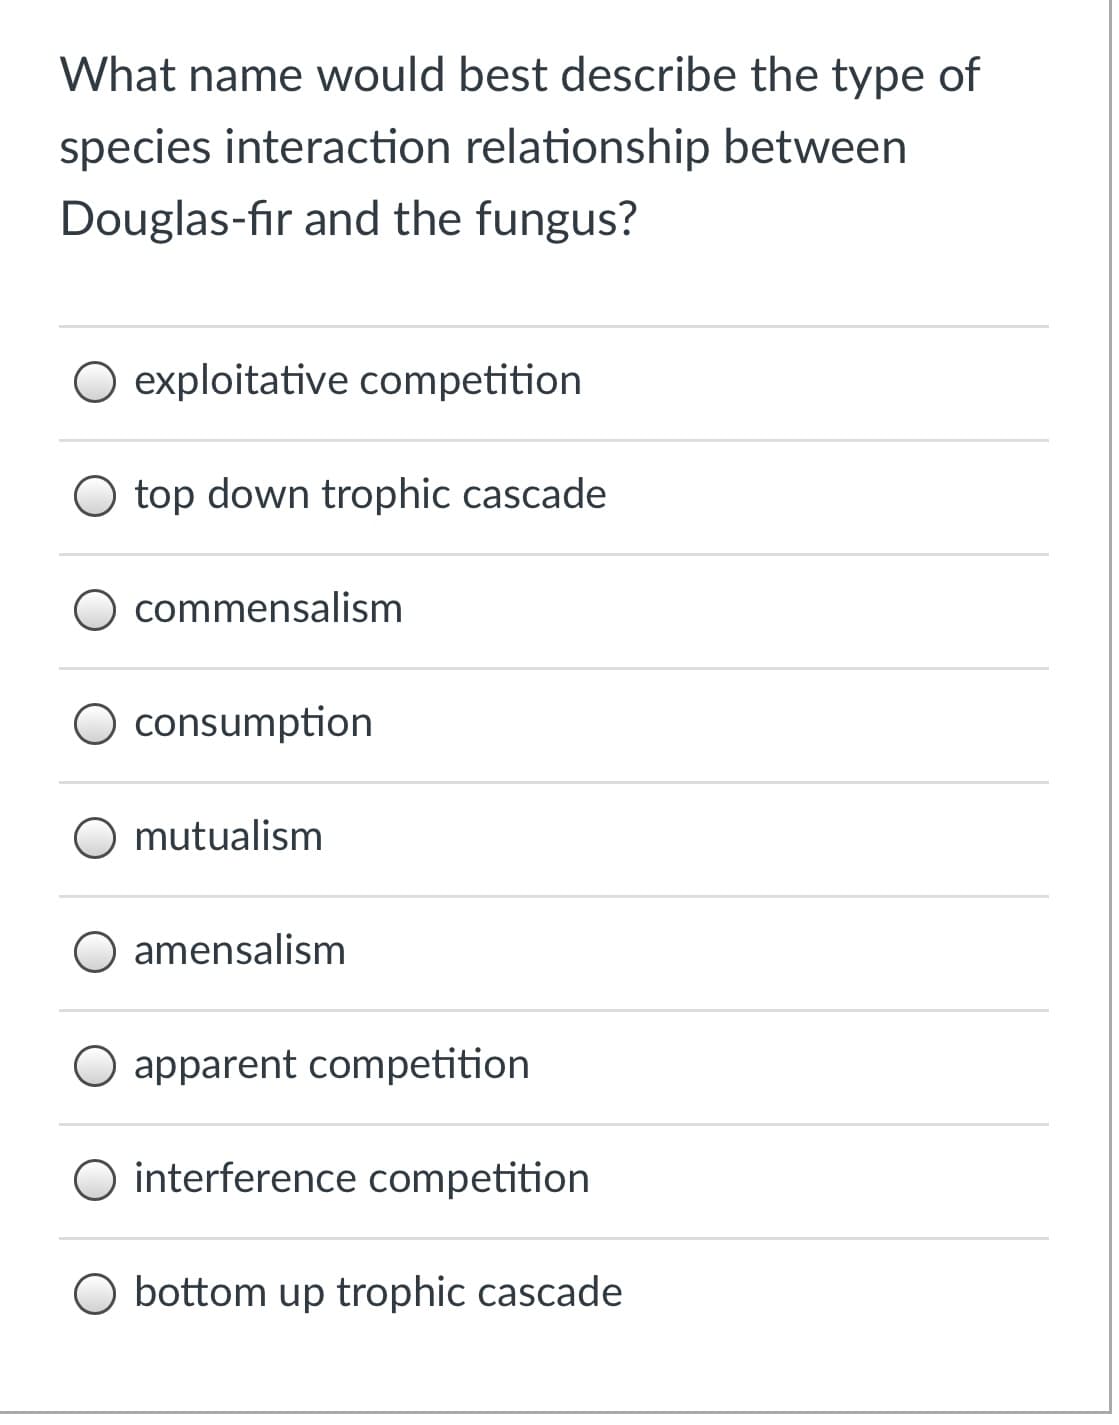 What name would best describe the type of
species interaction relationship between
Douglas-fir and the fungus?
O exploitative competition
O top down trophic cascade
O commensalism
consumption
O mutualism
O amensalism
apparent competition
O interference competition
O bottom up trophic cascade
